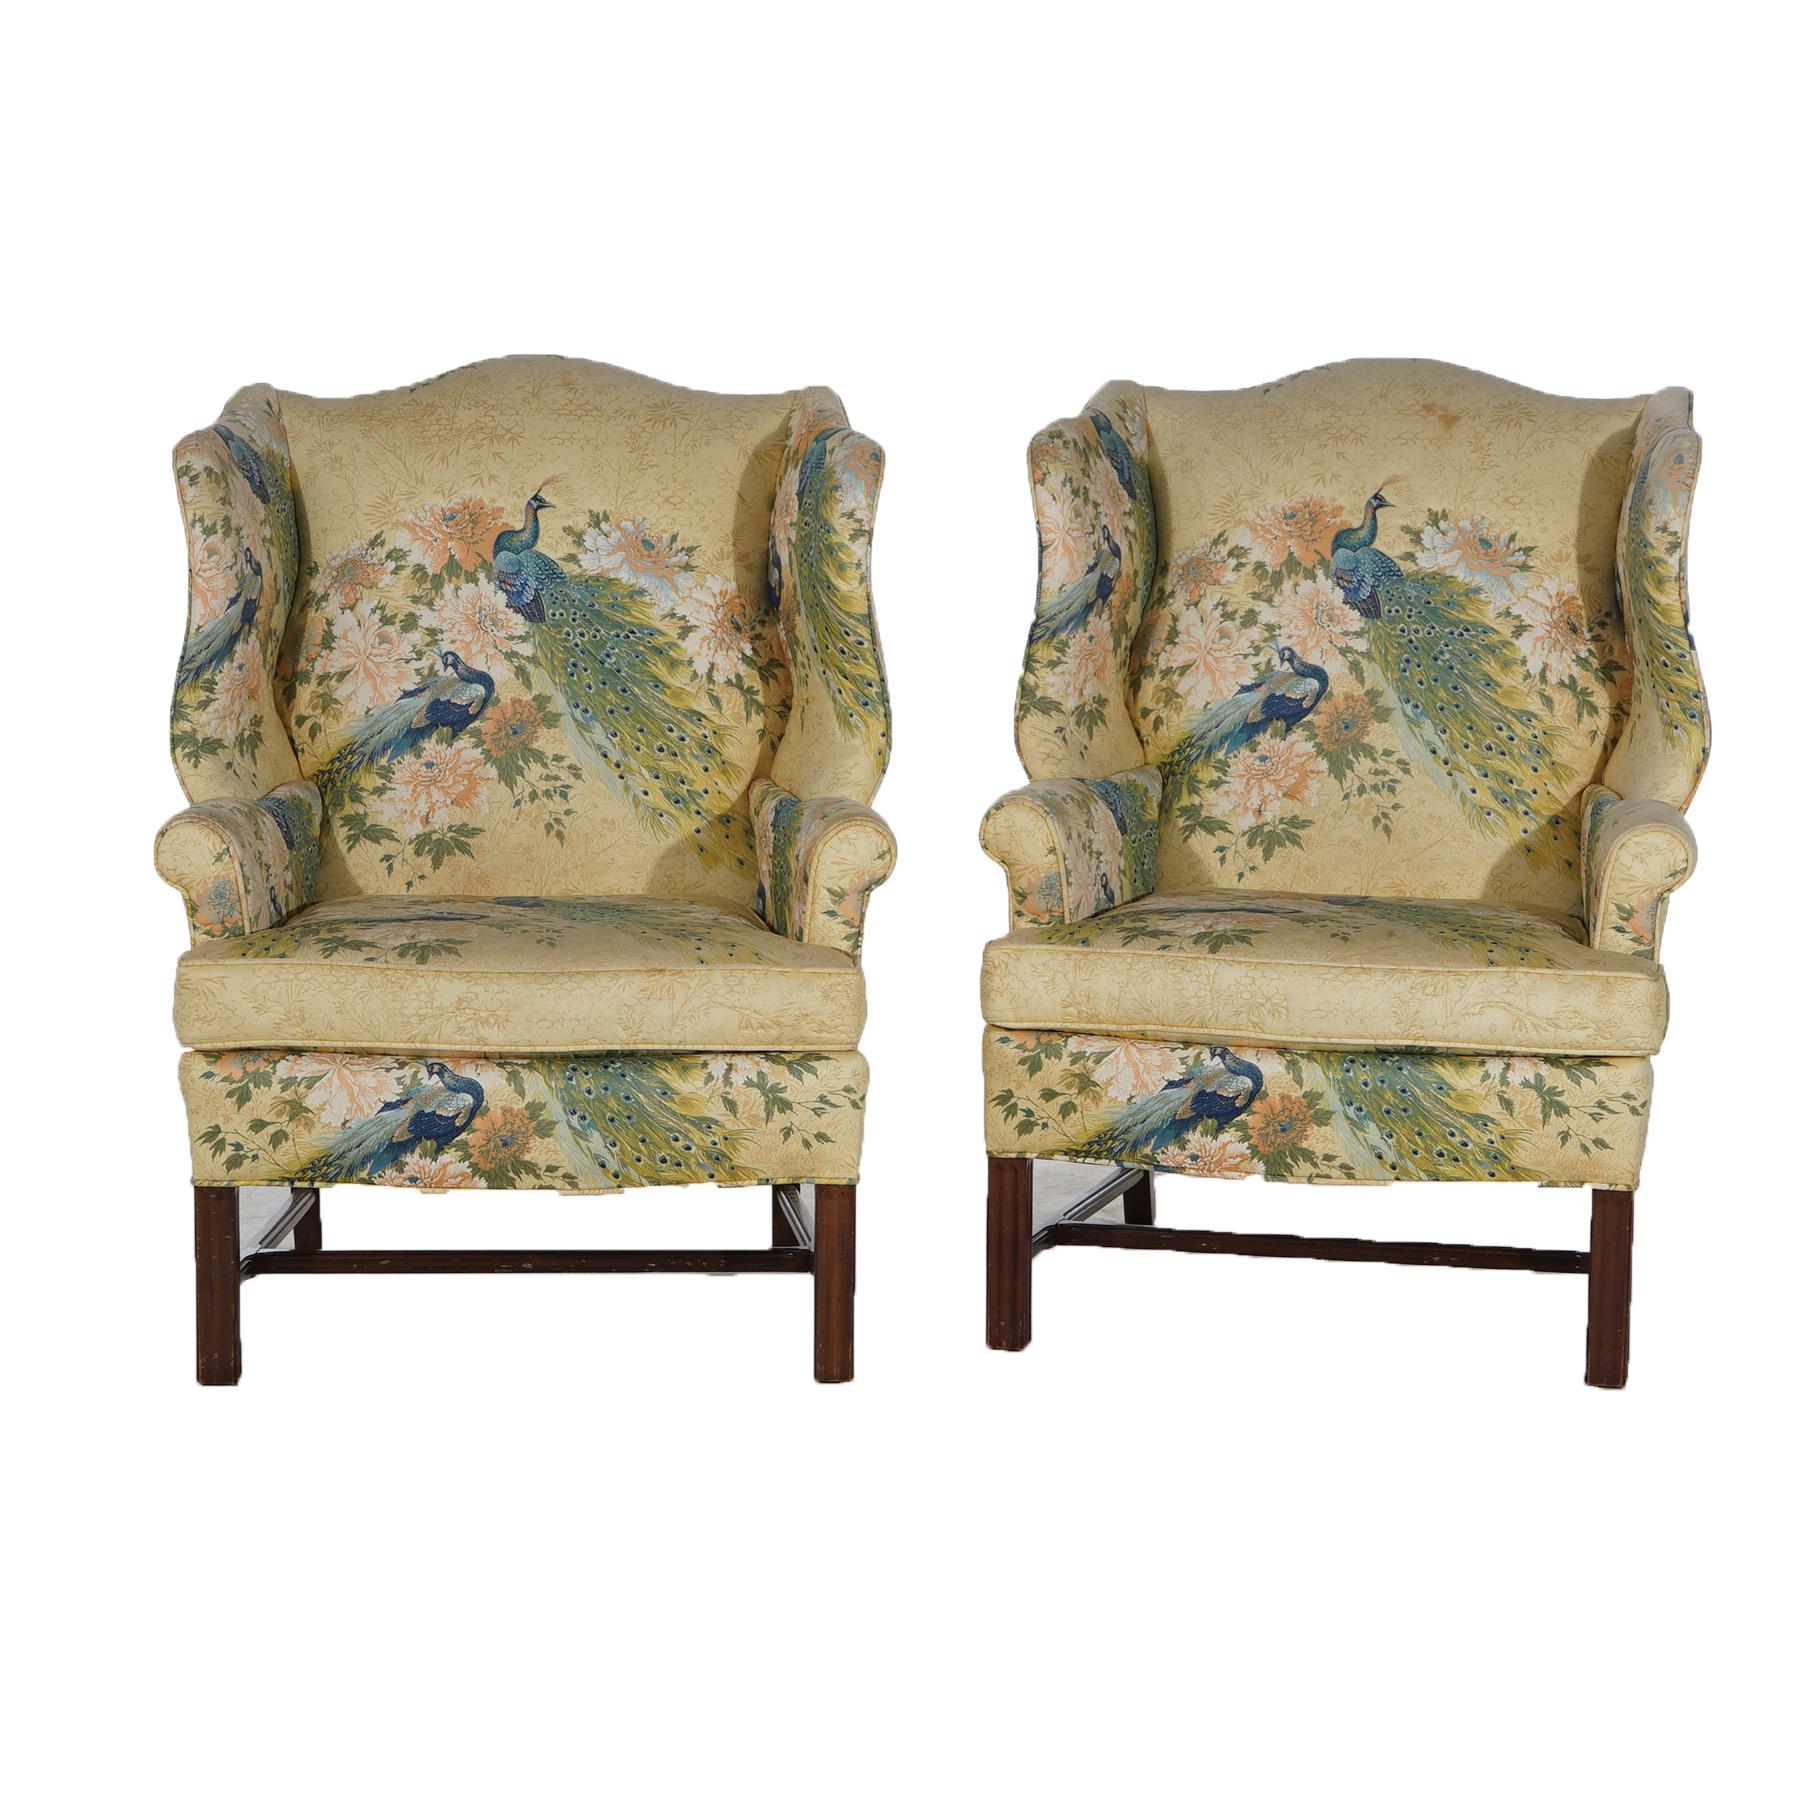 20th Century Pair of English Colonial Peacock & Floral Decorated Wing Back Chairs 20thC For Sale